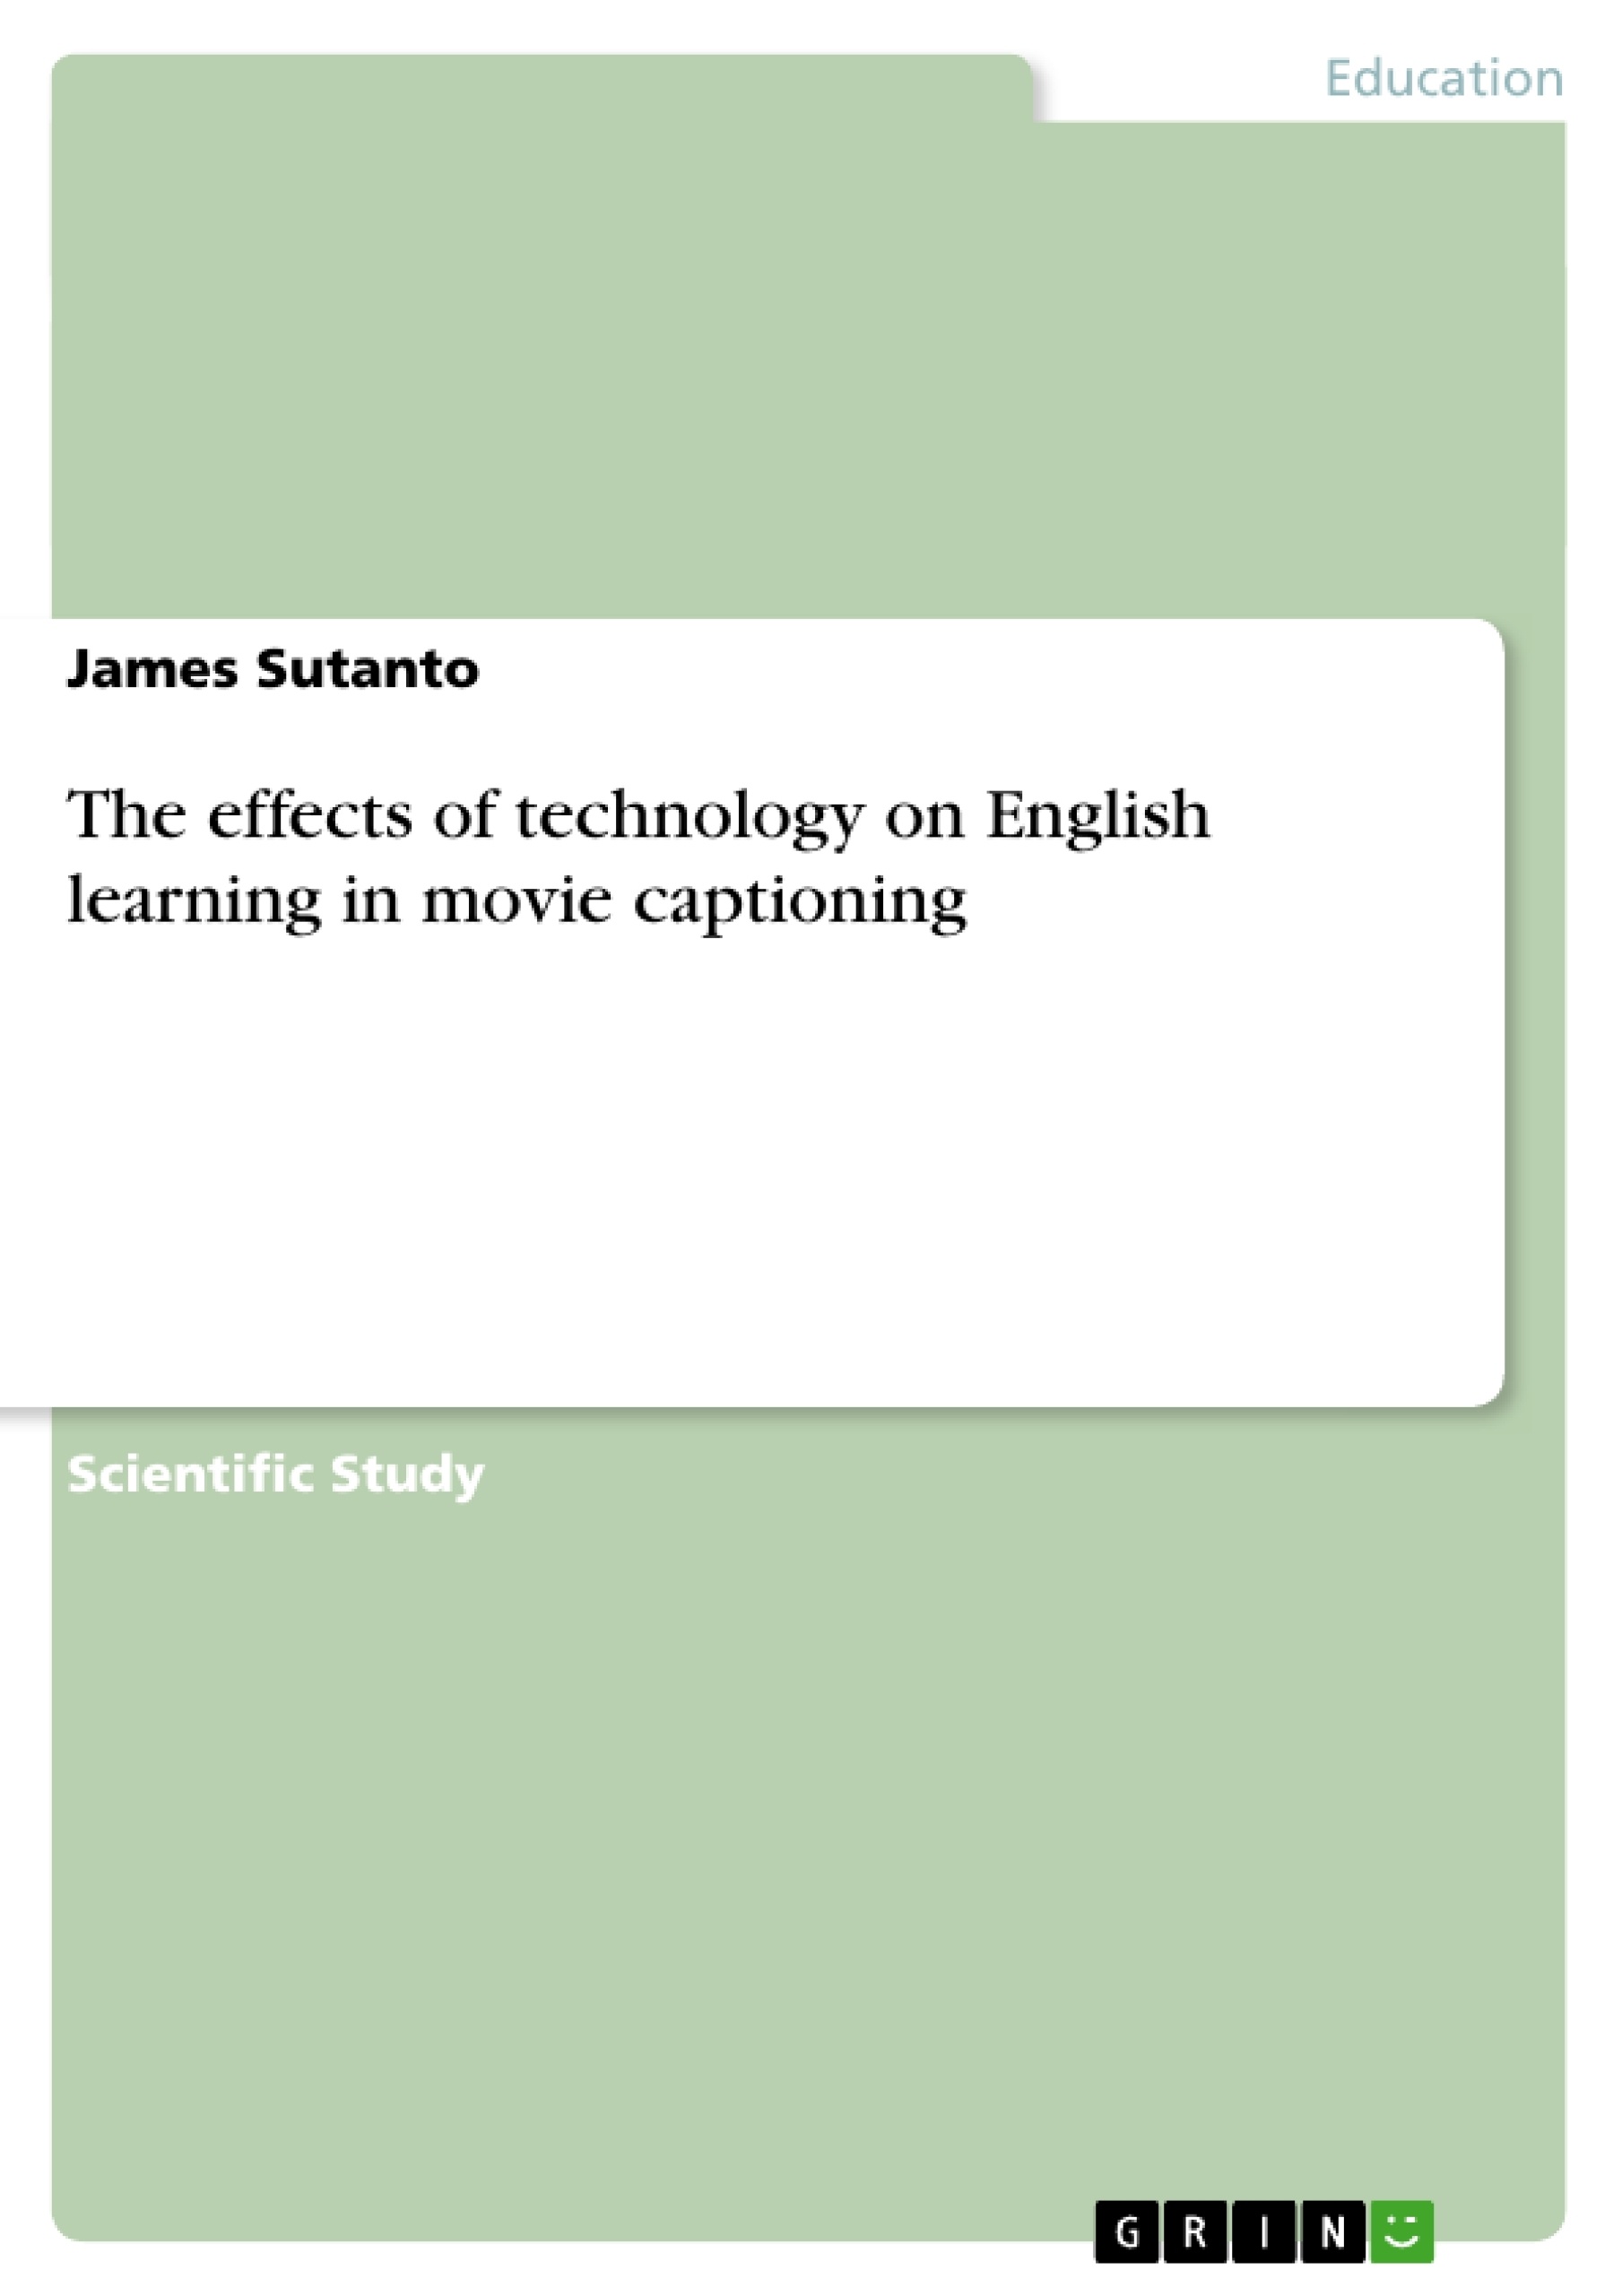 Title: The effects of technology on English learning in movie captioning